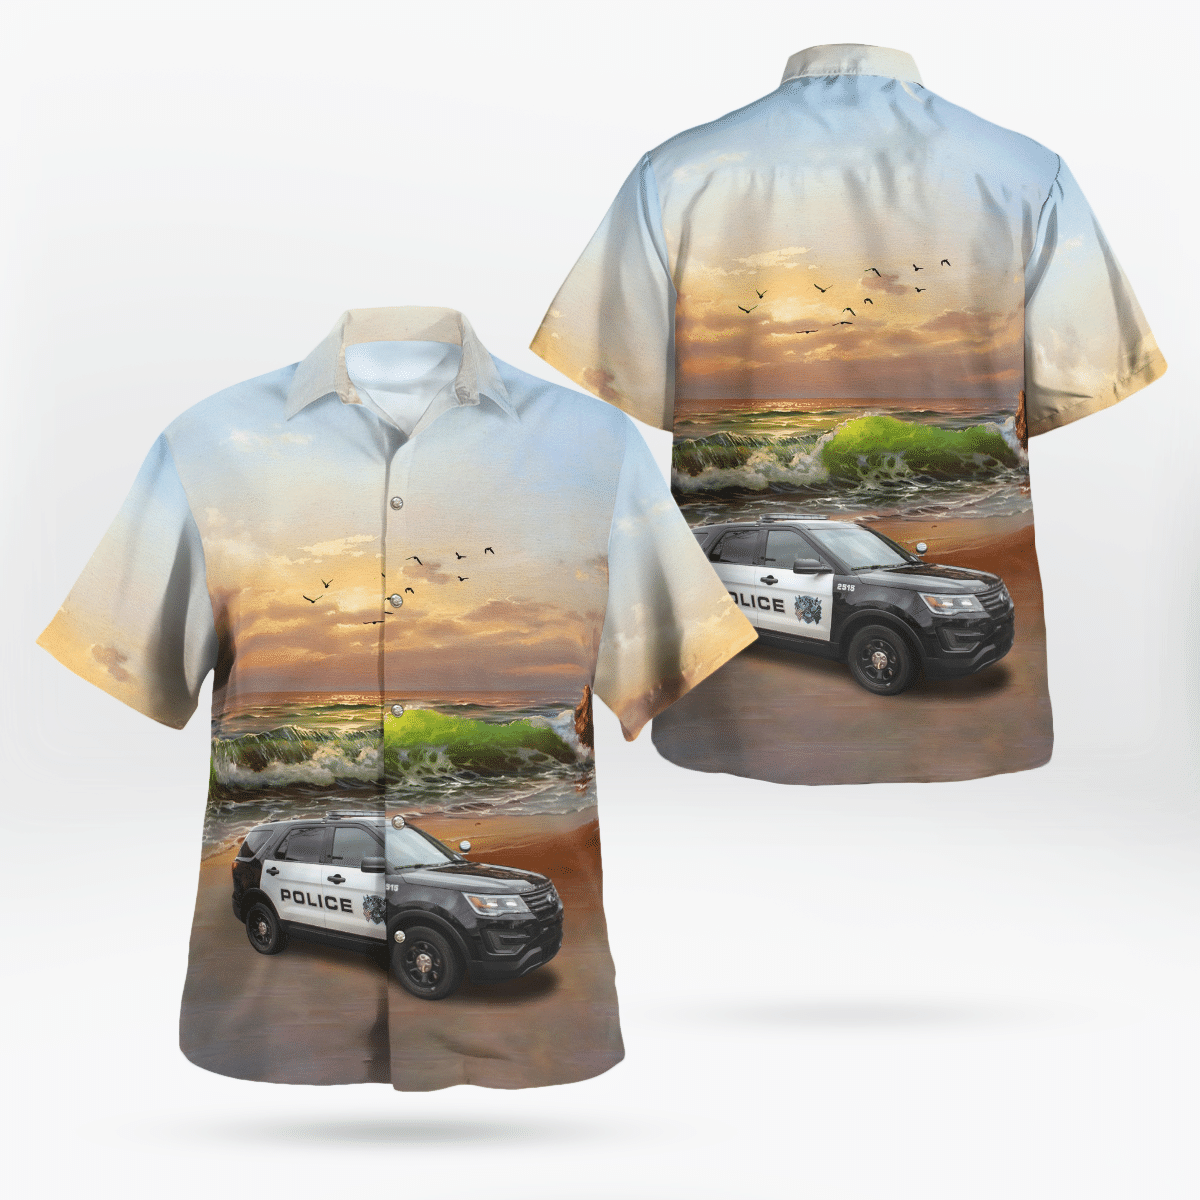 If you are in need of a new summertime look, pick up this Hawaiian shirt 25